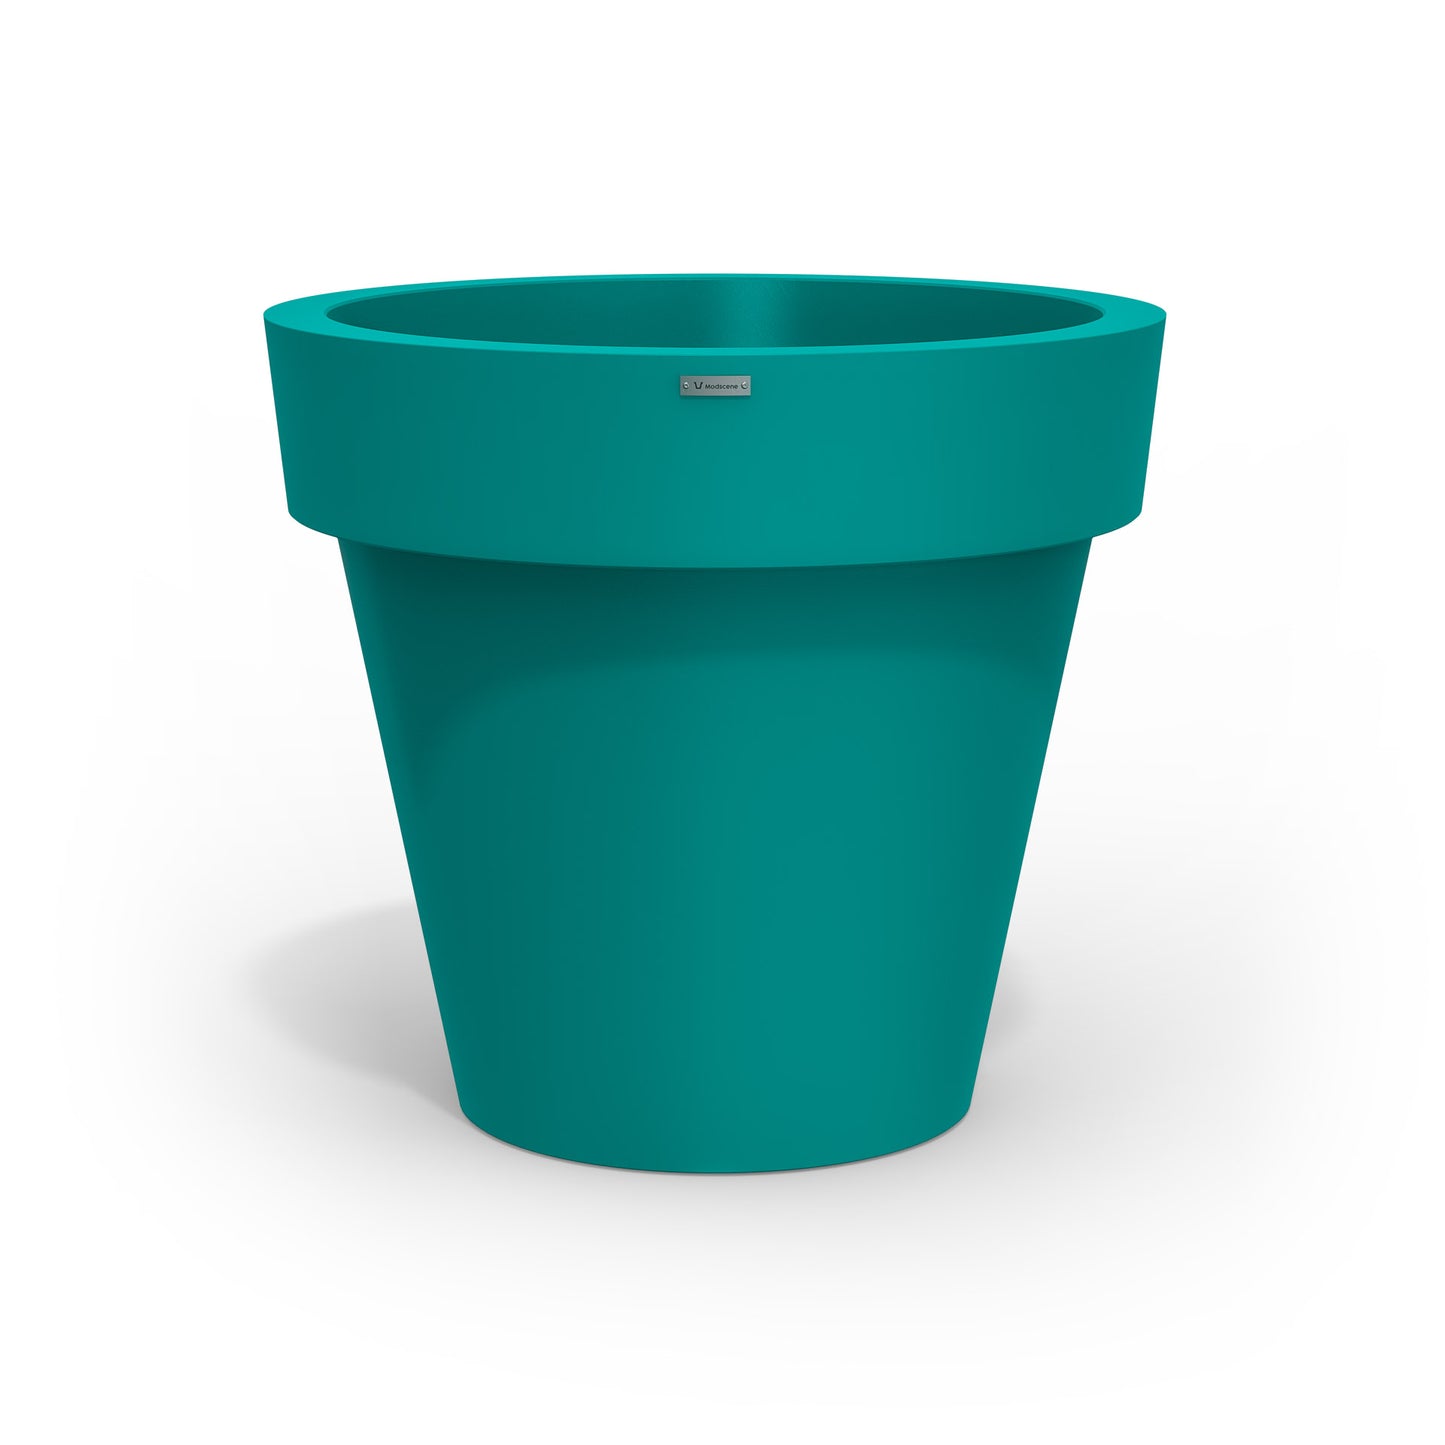 A large teal planter pot made by Modscene NZ.